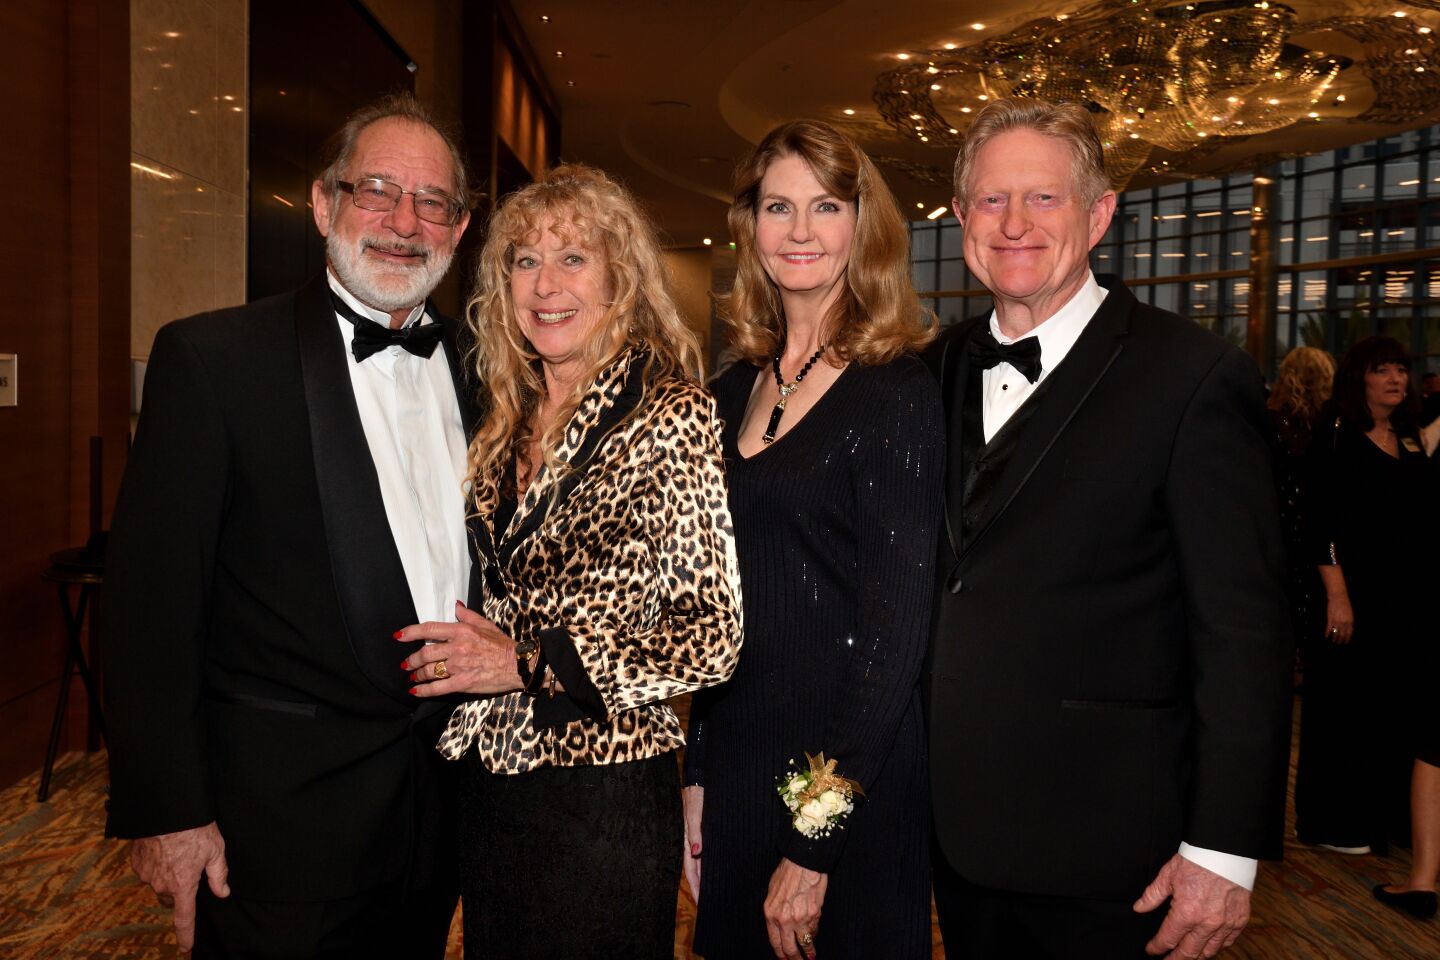 Brian Boswell and Lynne Krepak (event co-chair), Mara Morrison (event co-chair), Ted Alexander